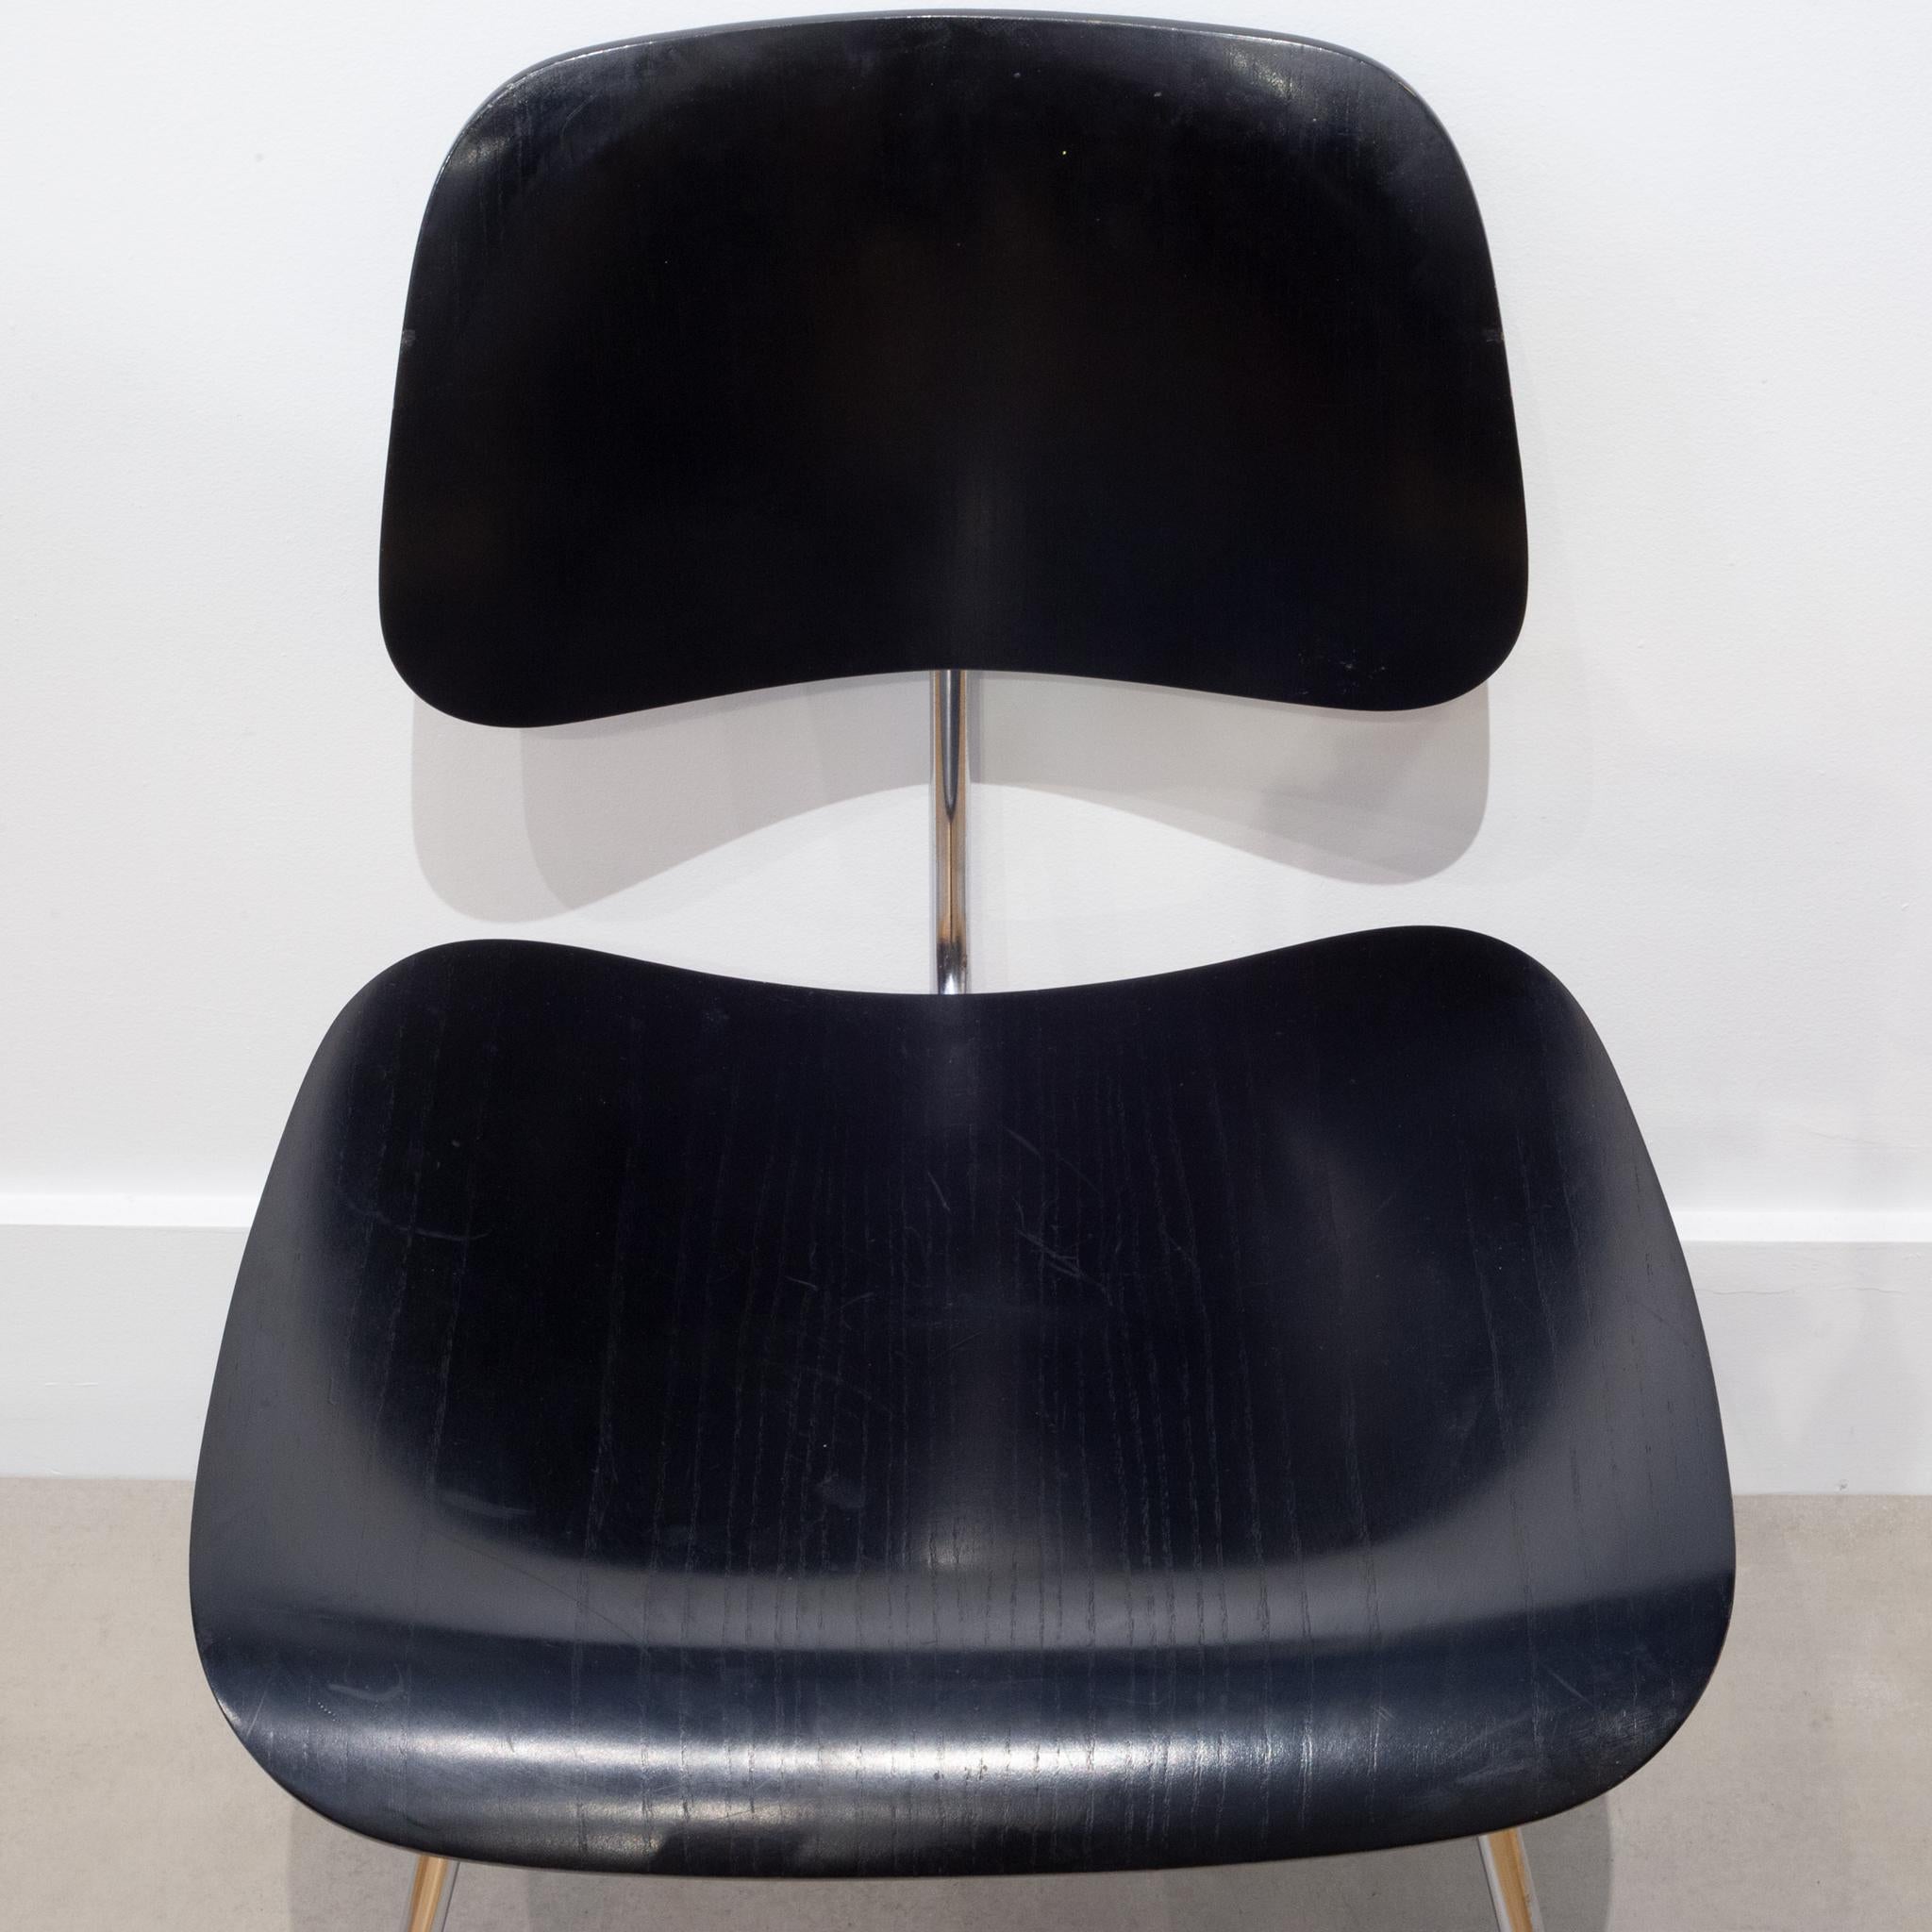 Eames for Herman Miller DCM Chairs in Black-Price is Per Chair 12